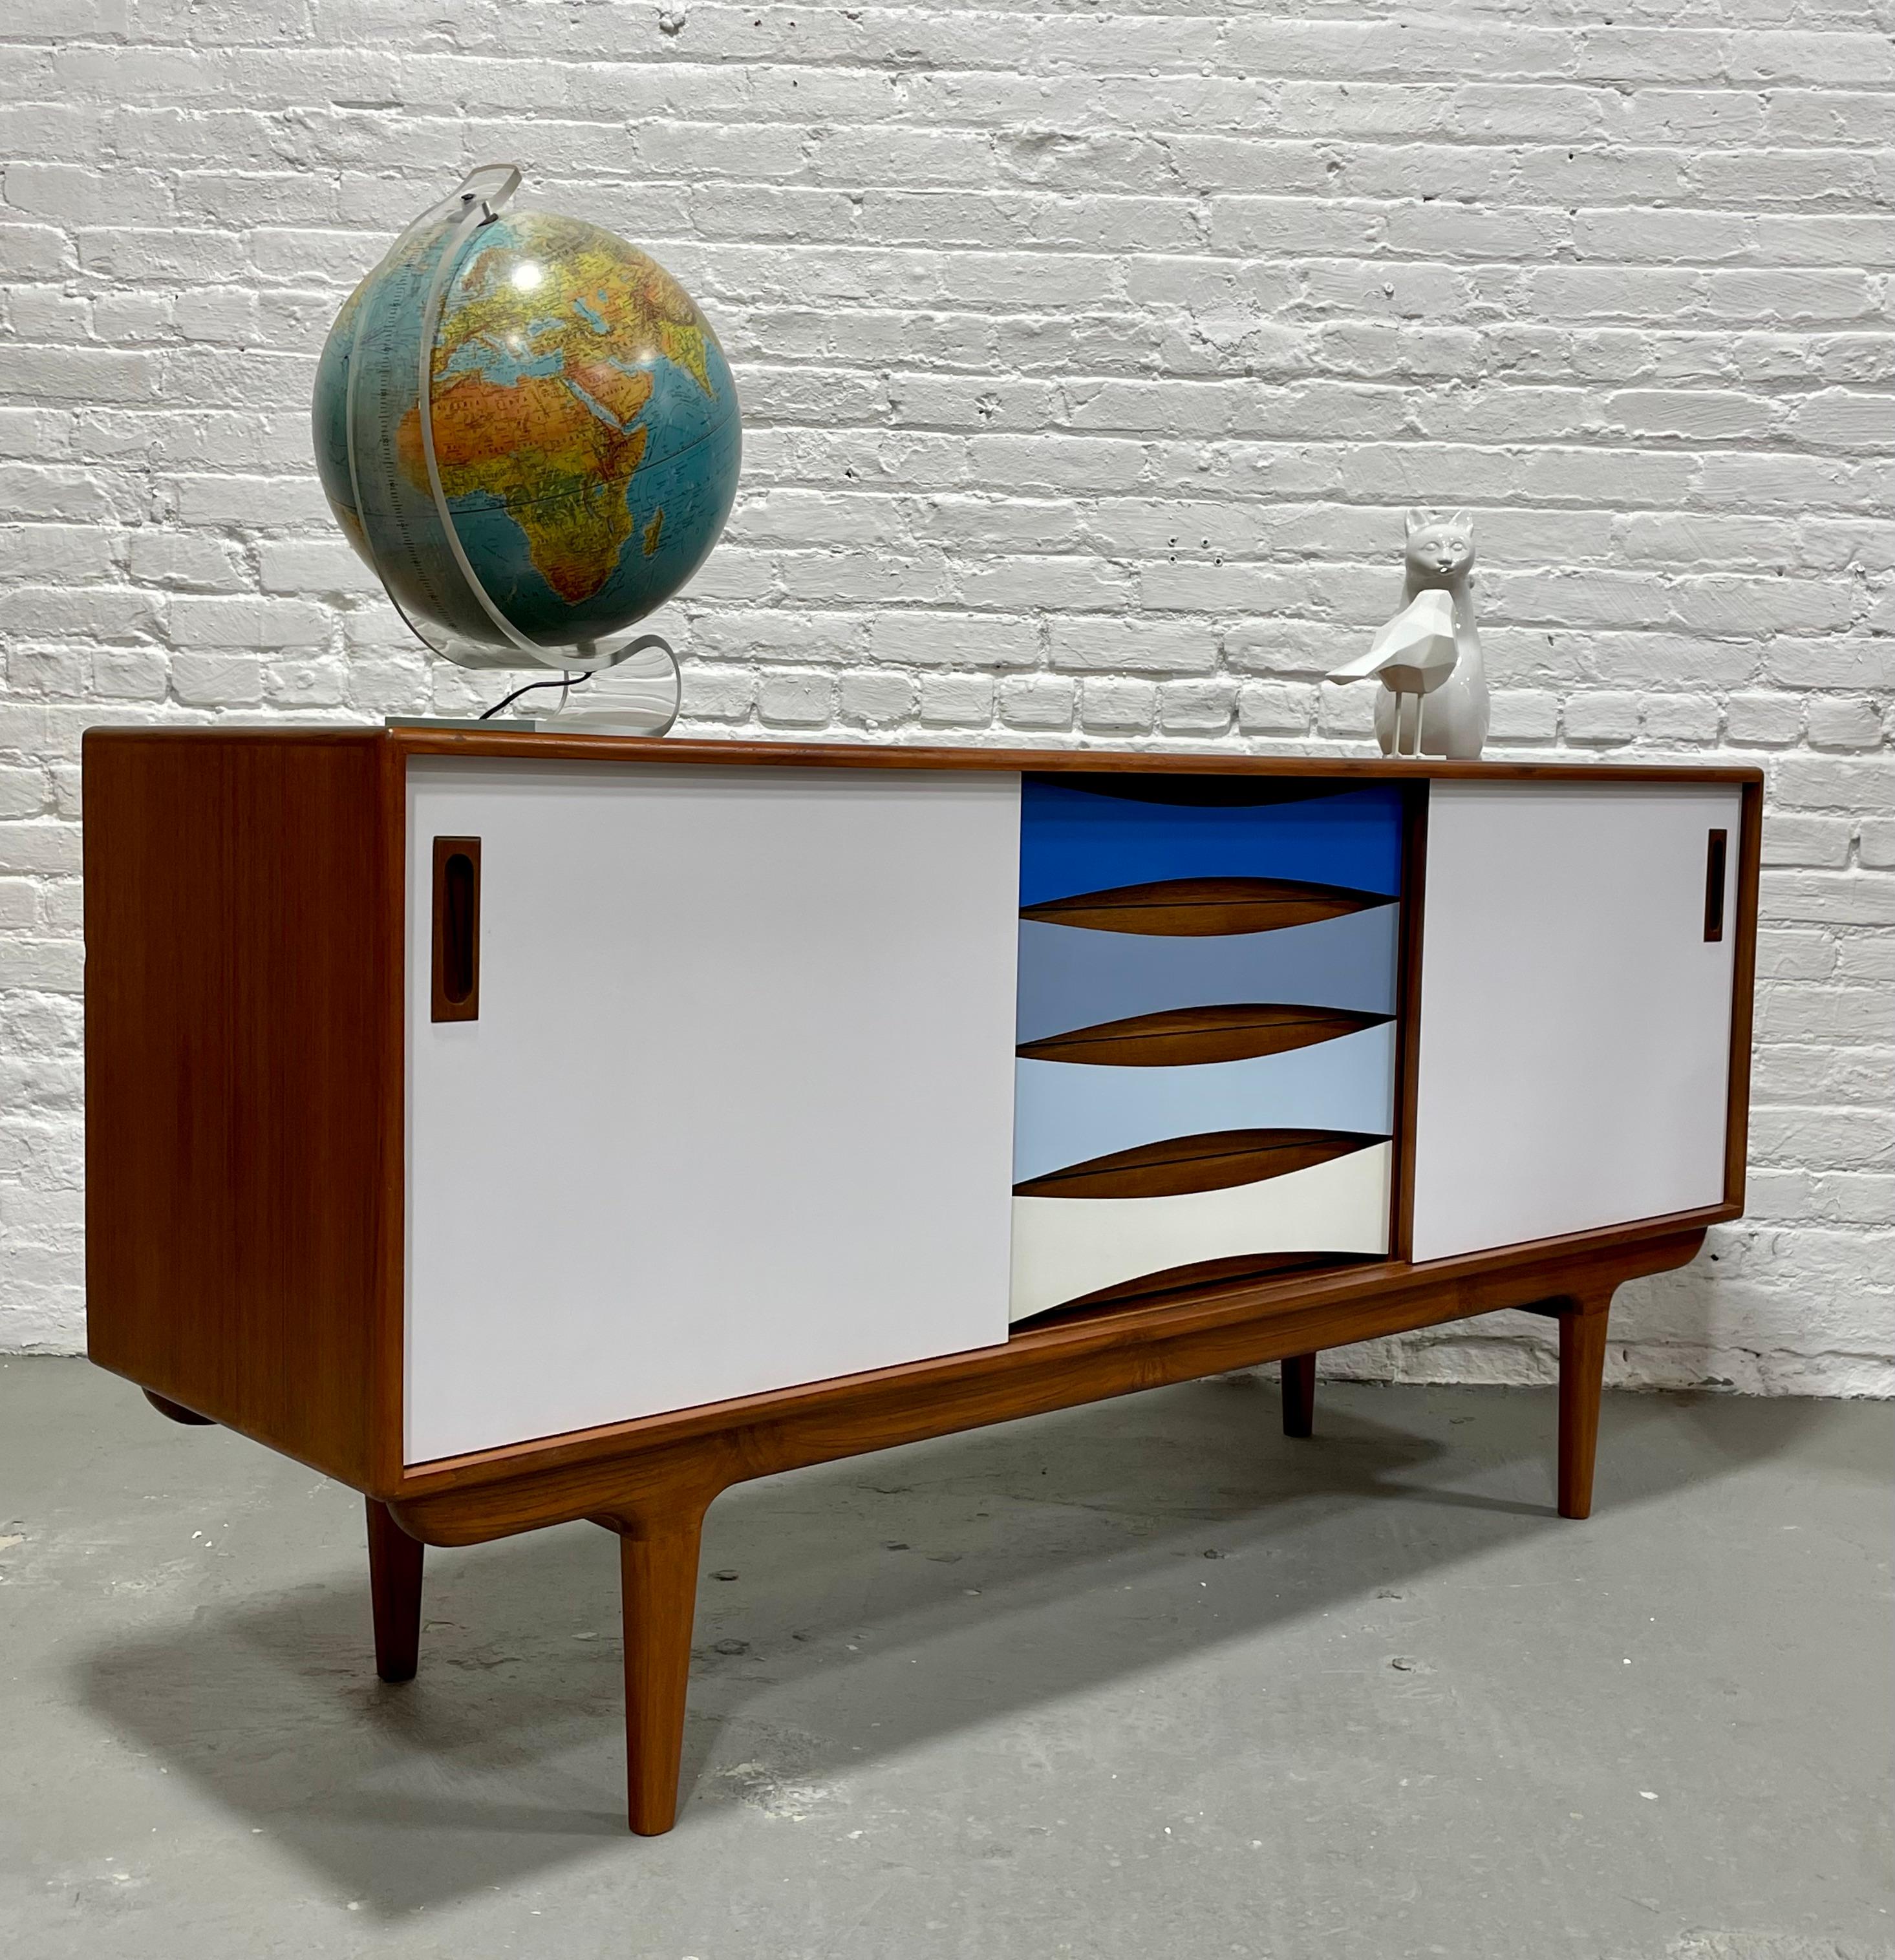 Contemporary Mid-Century Modern Shades of Blue Credenza / Sideboard / Media Stand For Sale